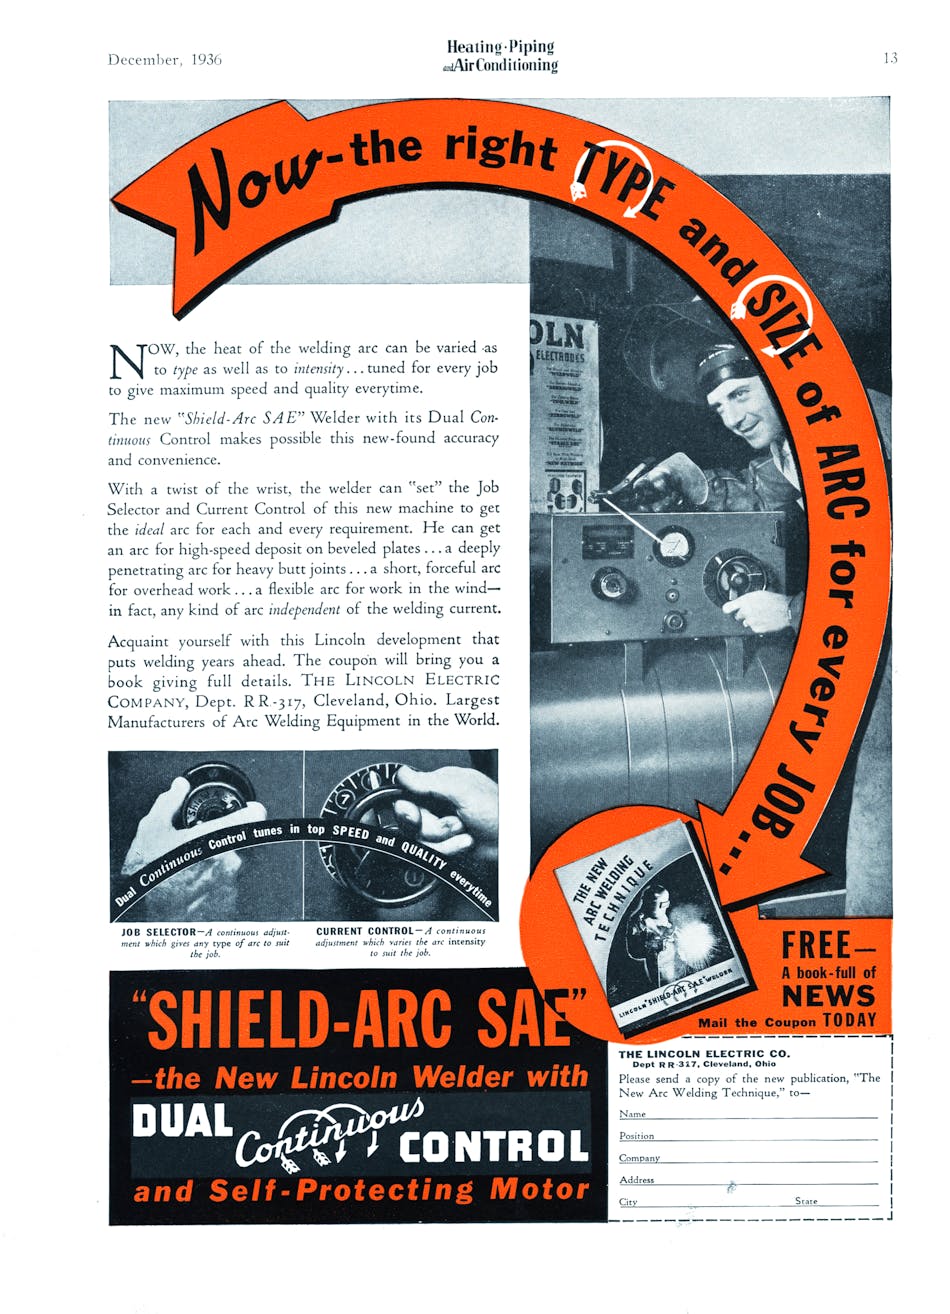 Hpac Com Sites Hpac com Files Uploads 2015 03 34 lincoln Electric Type Size December 1936